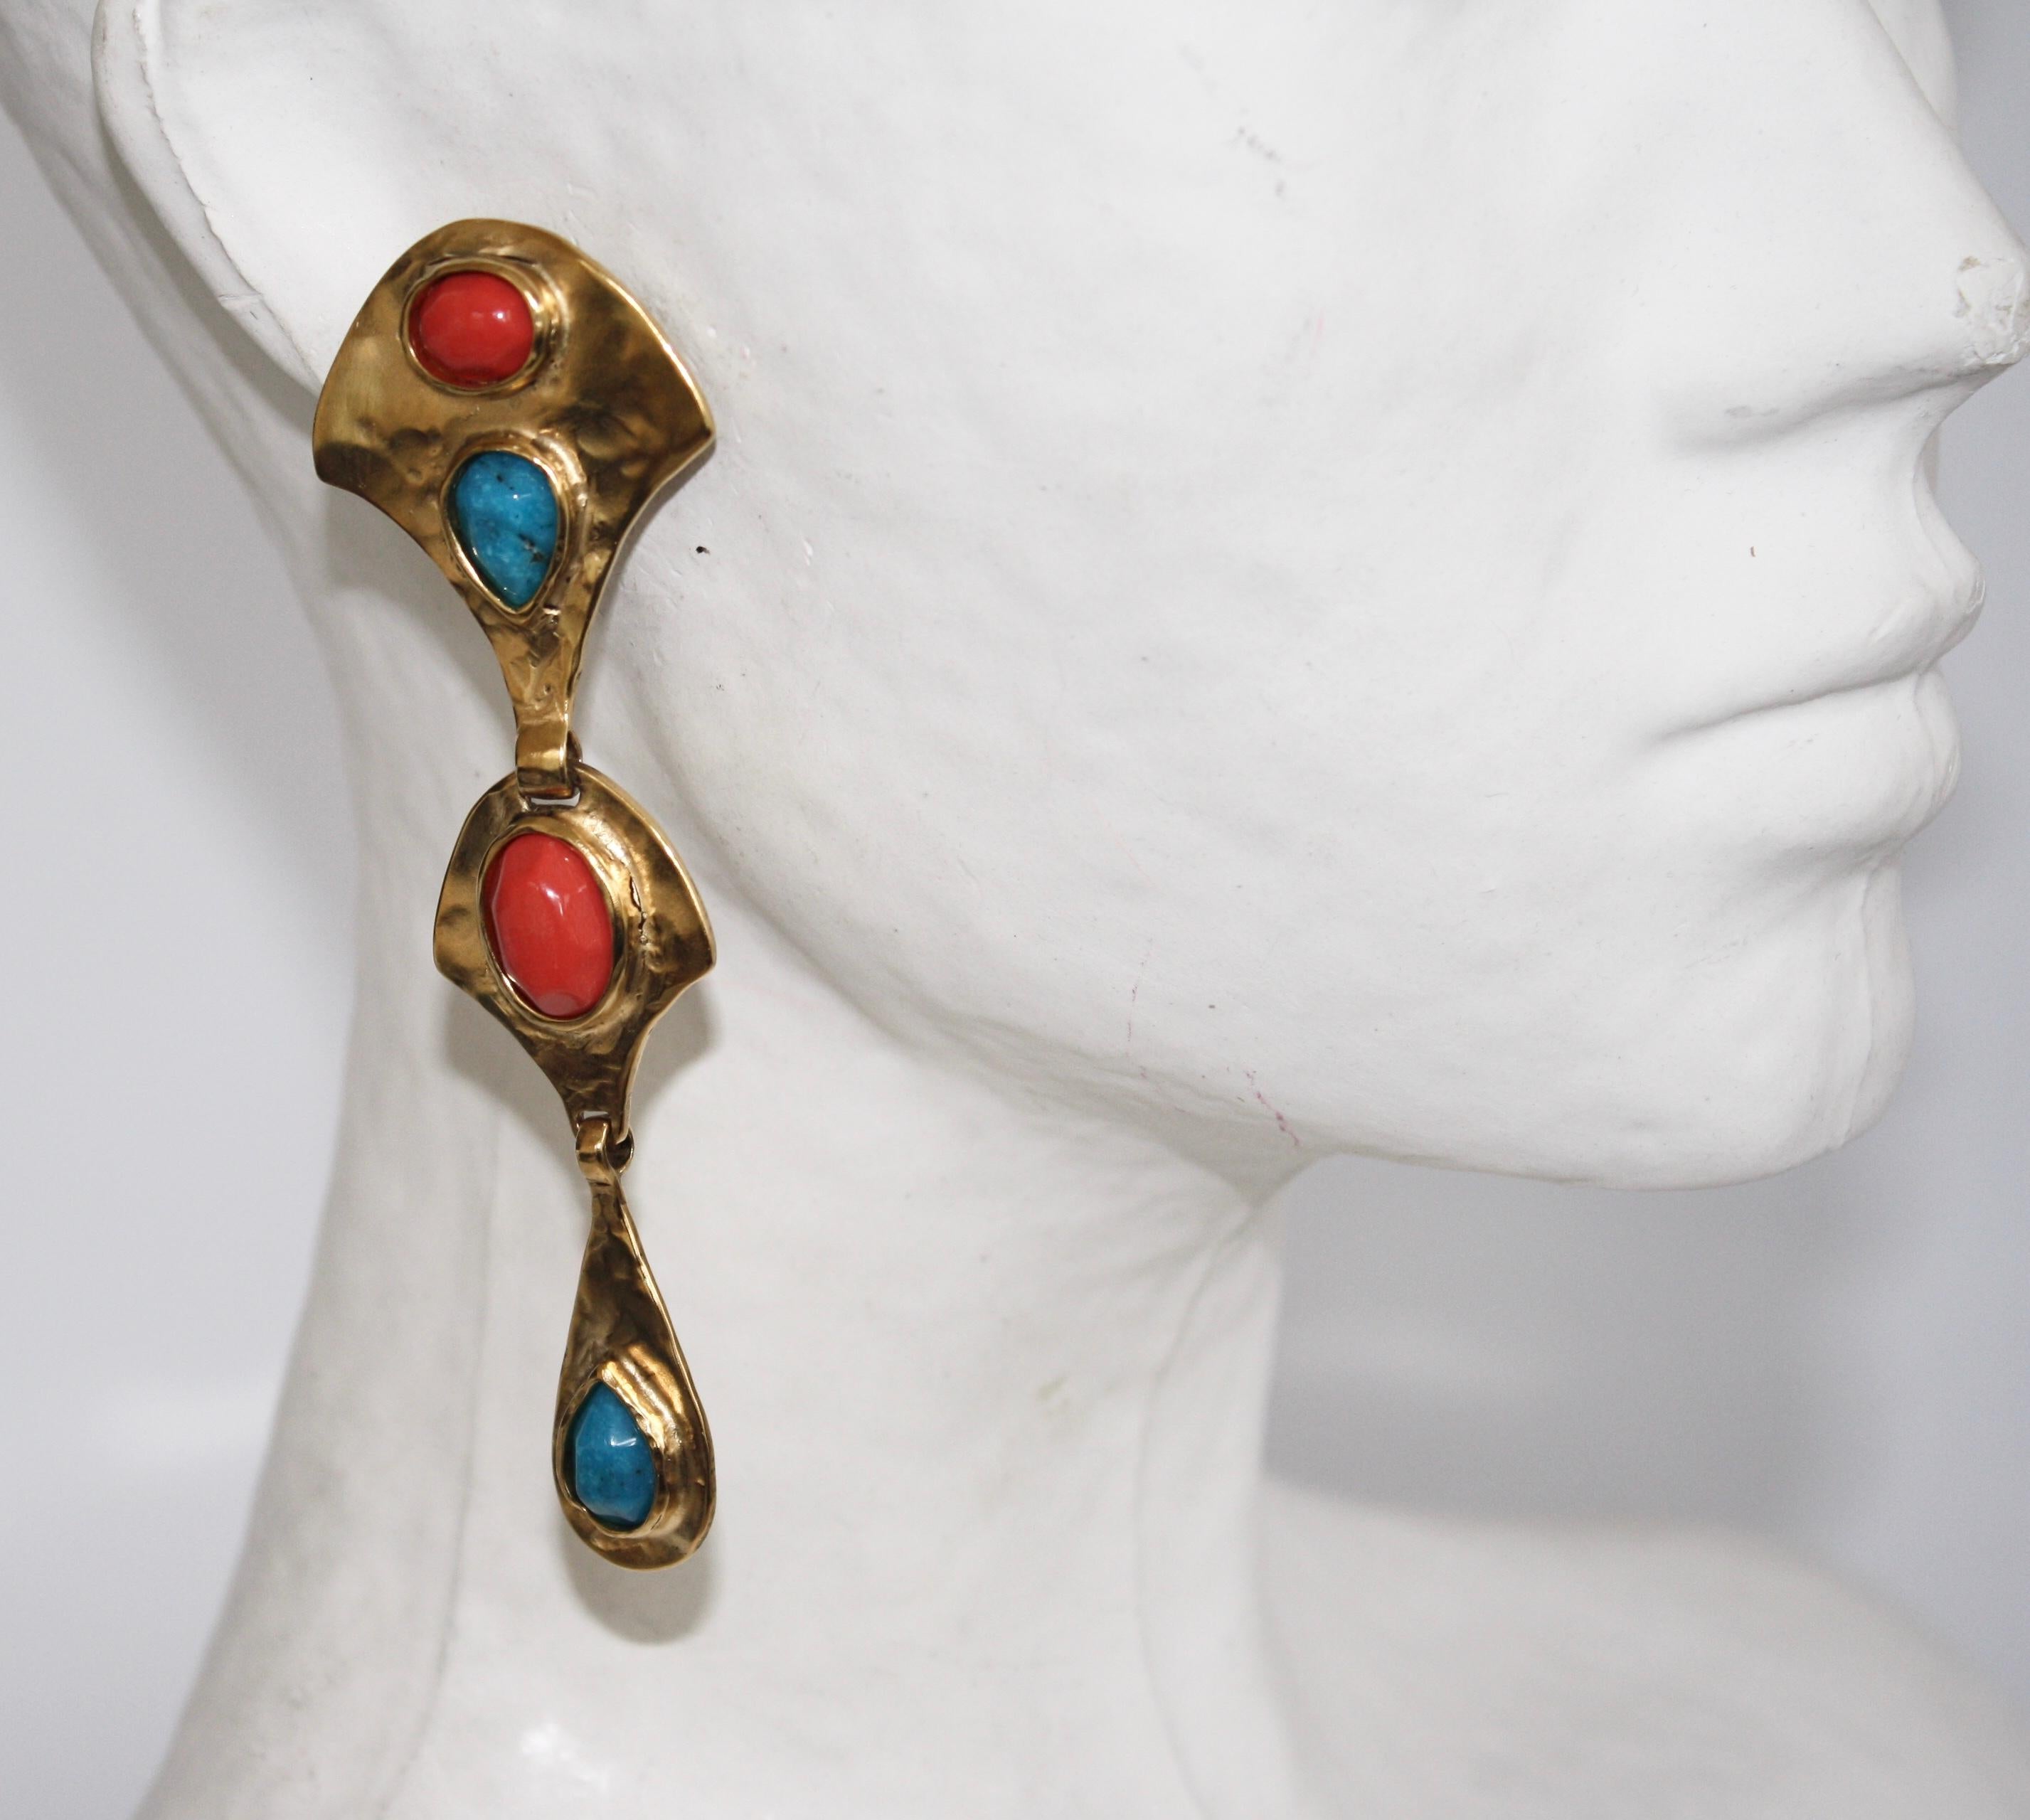 Byzantium inspired earrings, made of metal plated in 24K gold bath, decorated with turquoise and coral cabochons.